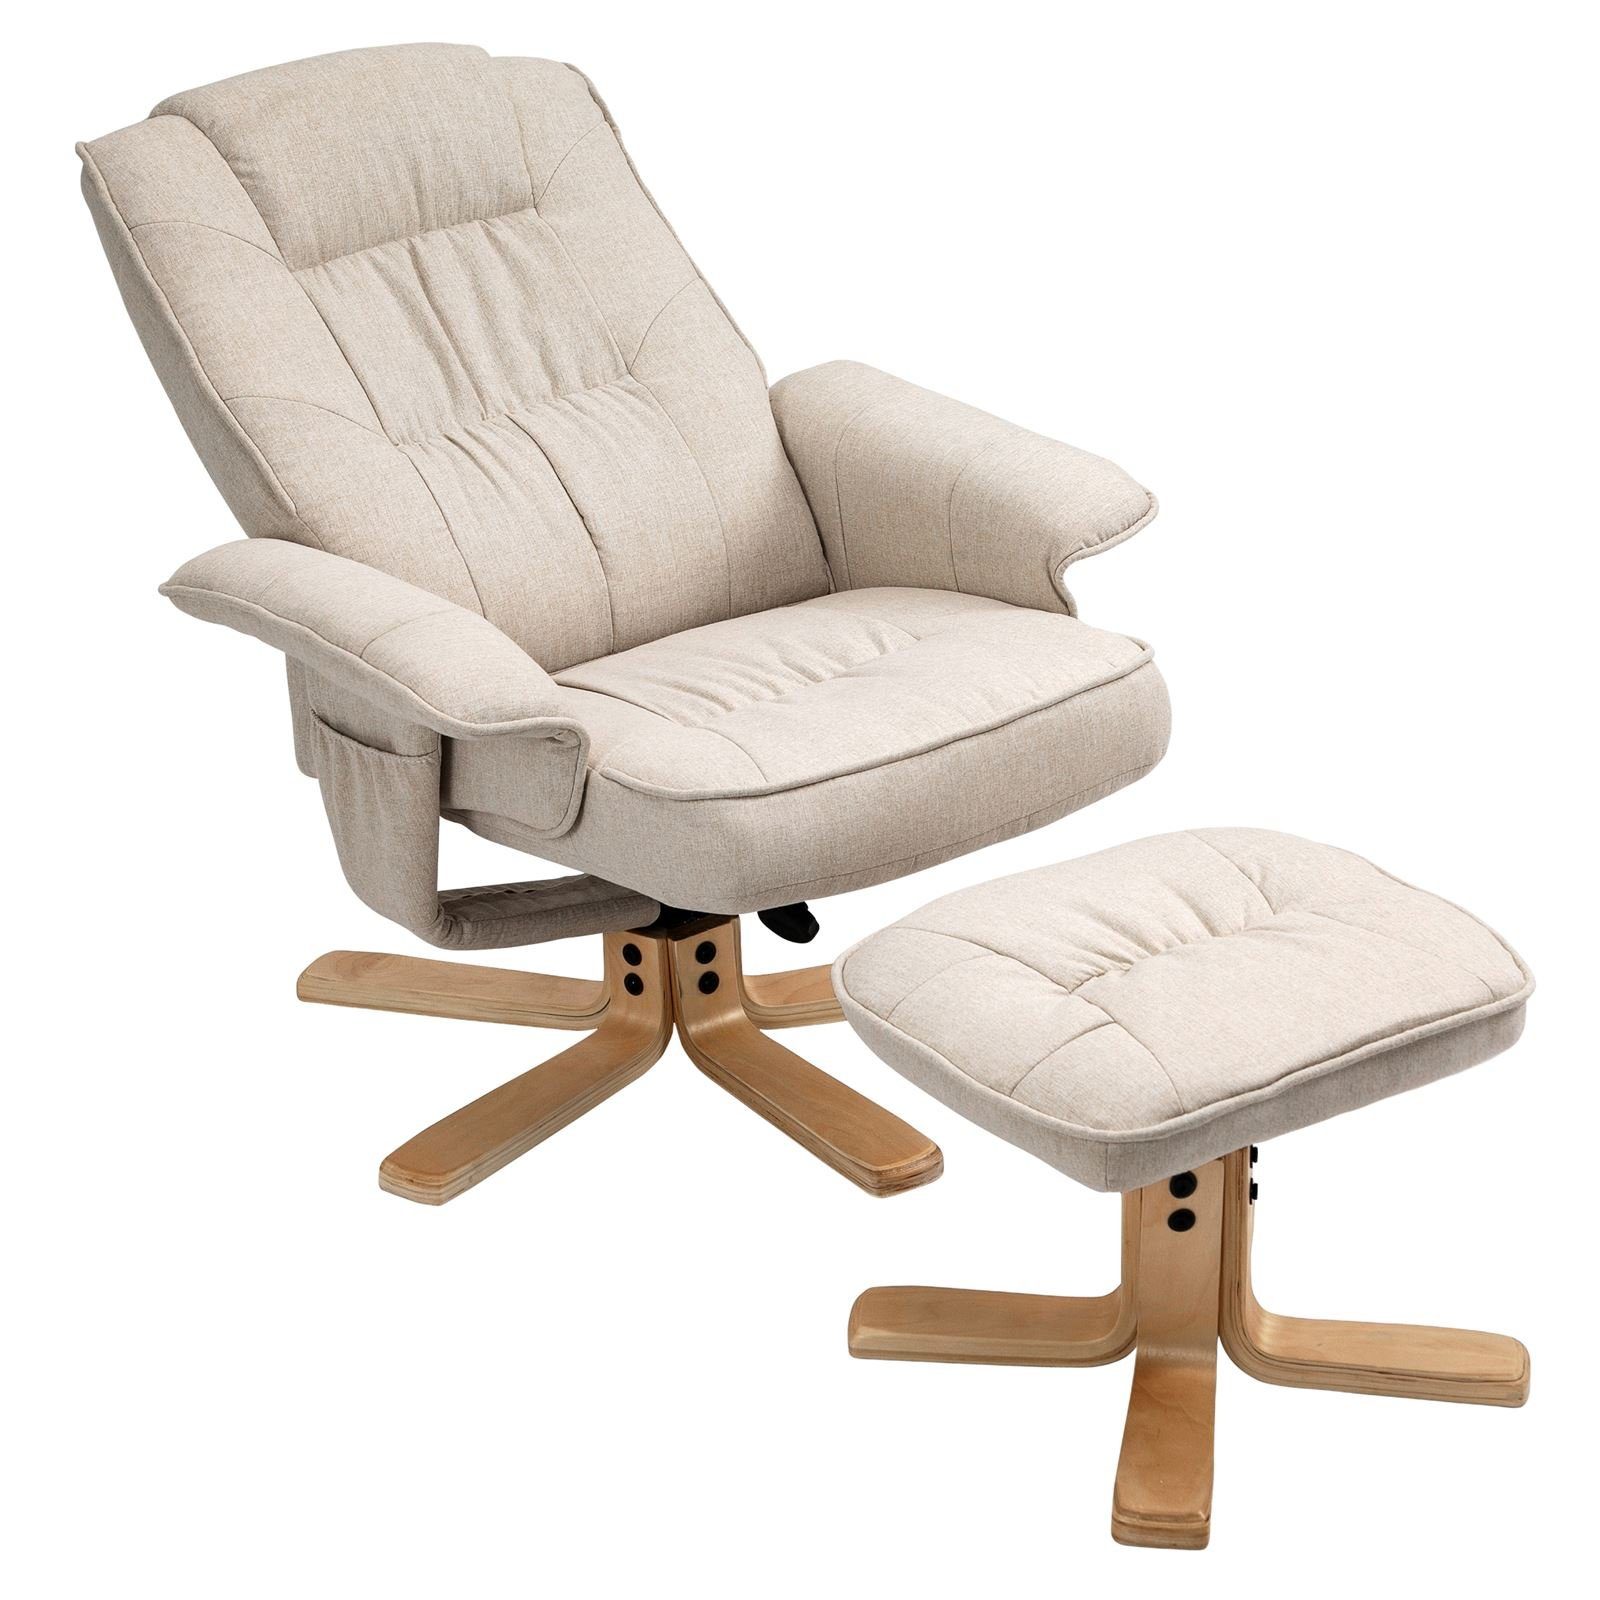 Fernsehsessel Stoff mit be beige Drehsessel Relaxsessel CHARLY, Hocker IDIMEX Relaxsessel Polstersessel